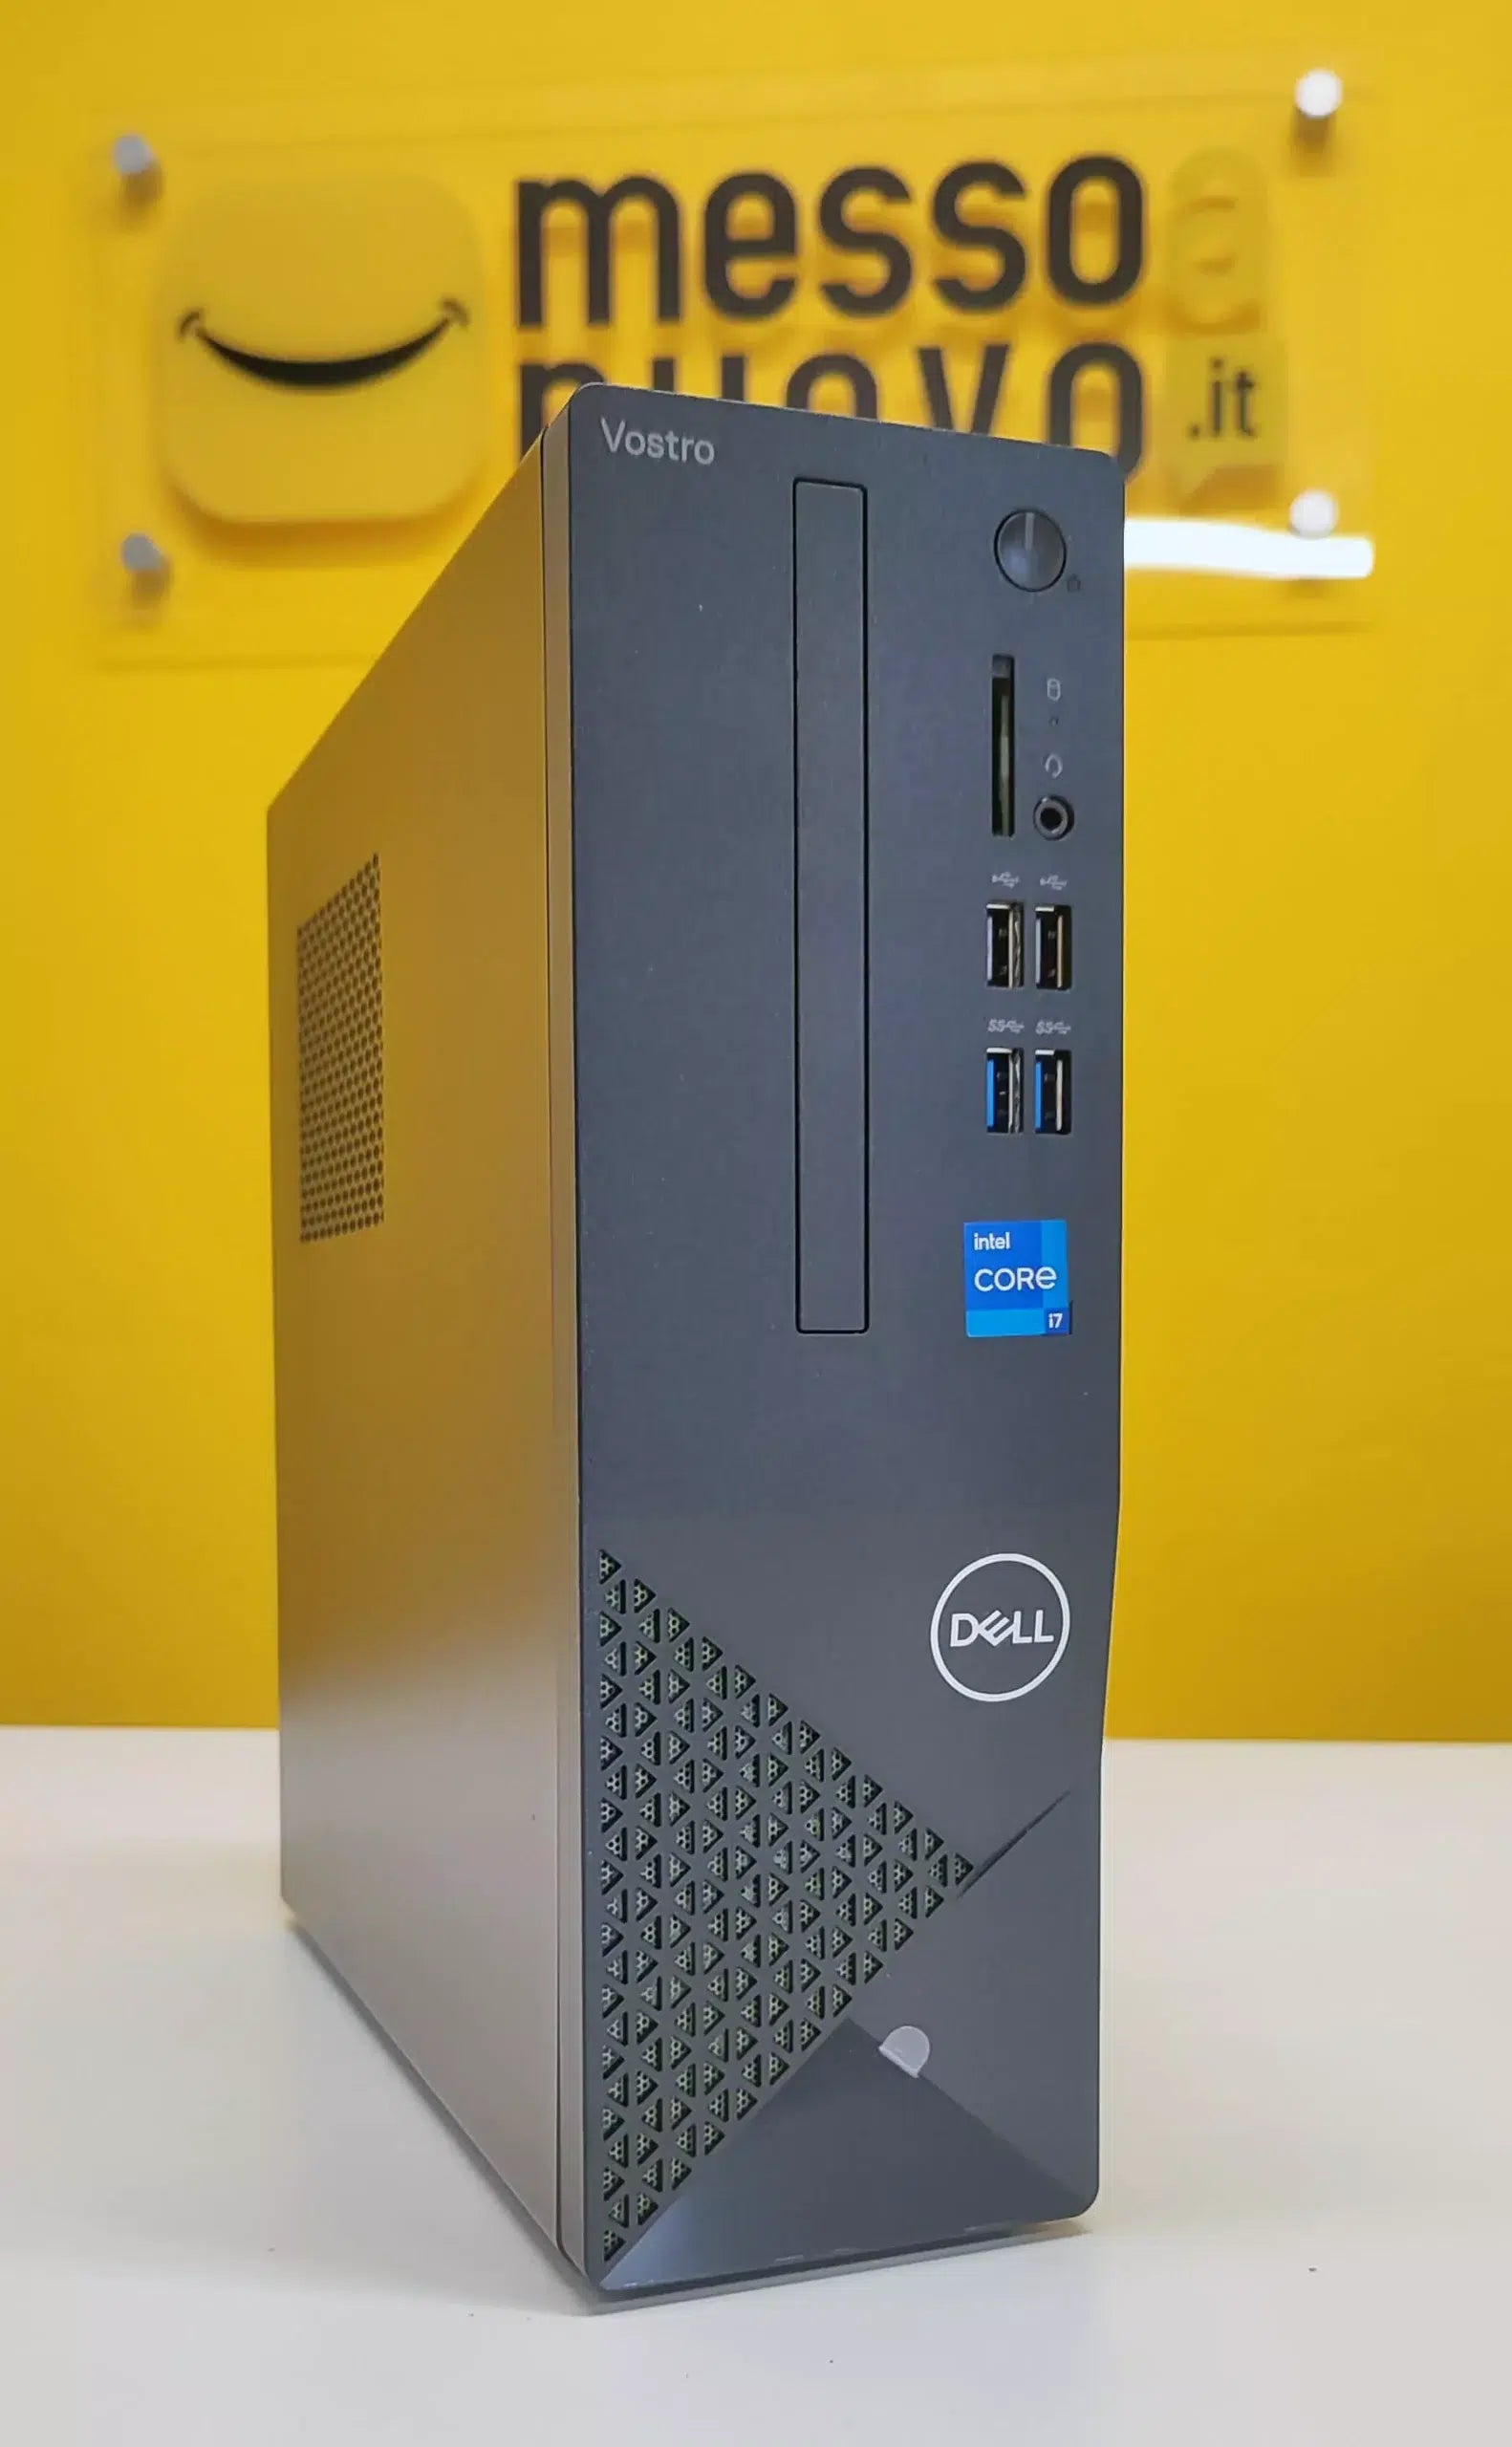 Dell Vostro 3710 SFF | Intel Core i7-12700 | Ram 16GB | 512GB NVMe SSD | Windows 11 Pro WiFi Bluetooth HDMI high performance at your service NEW PRODUCT